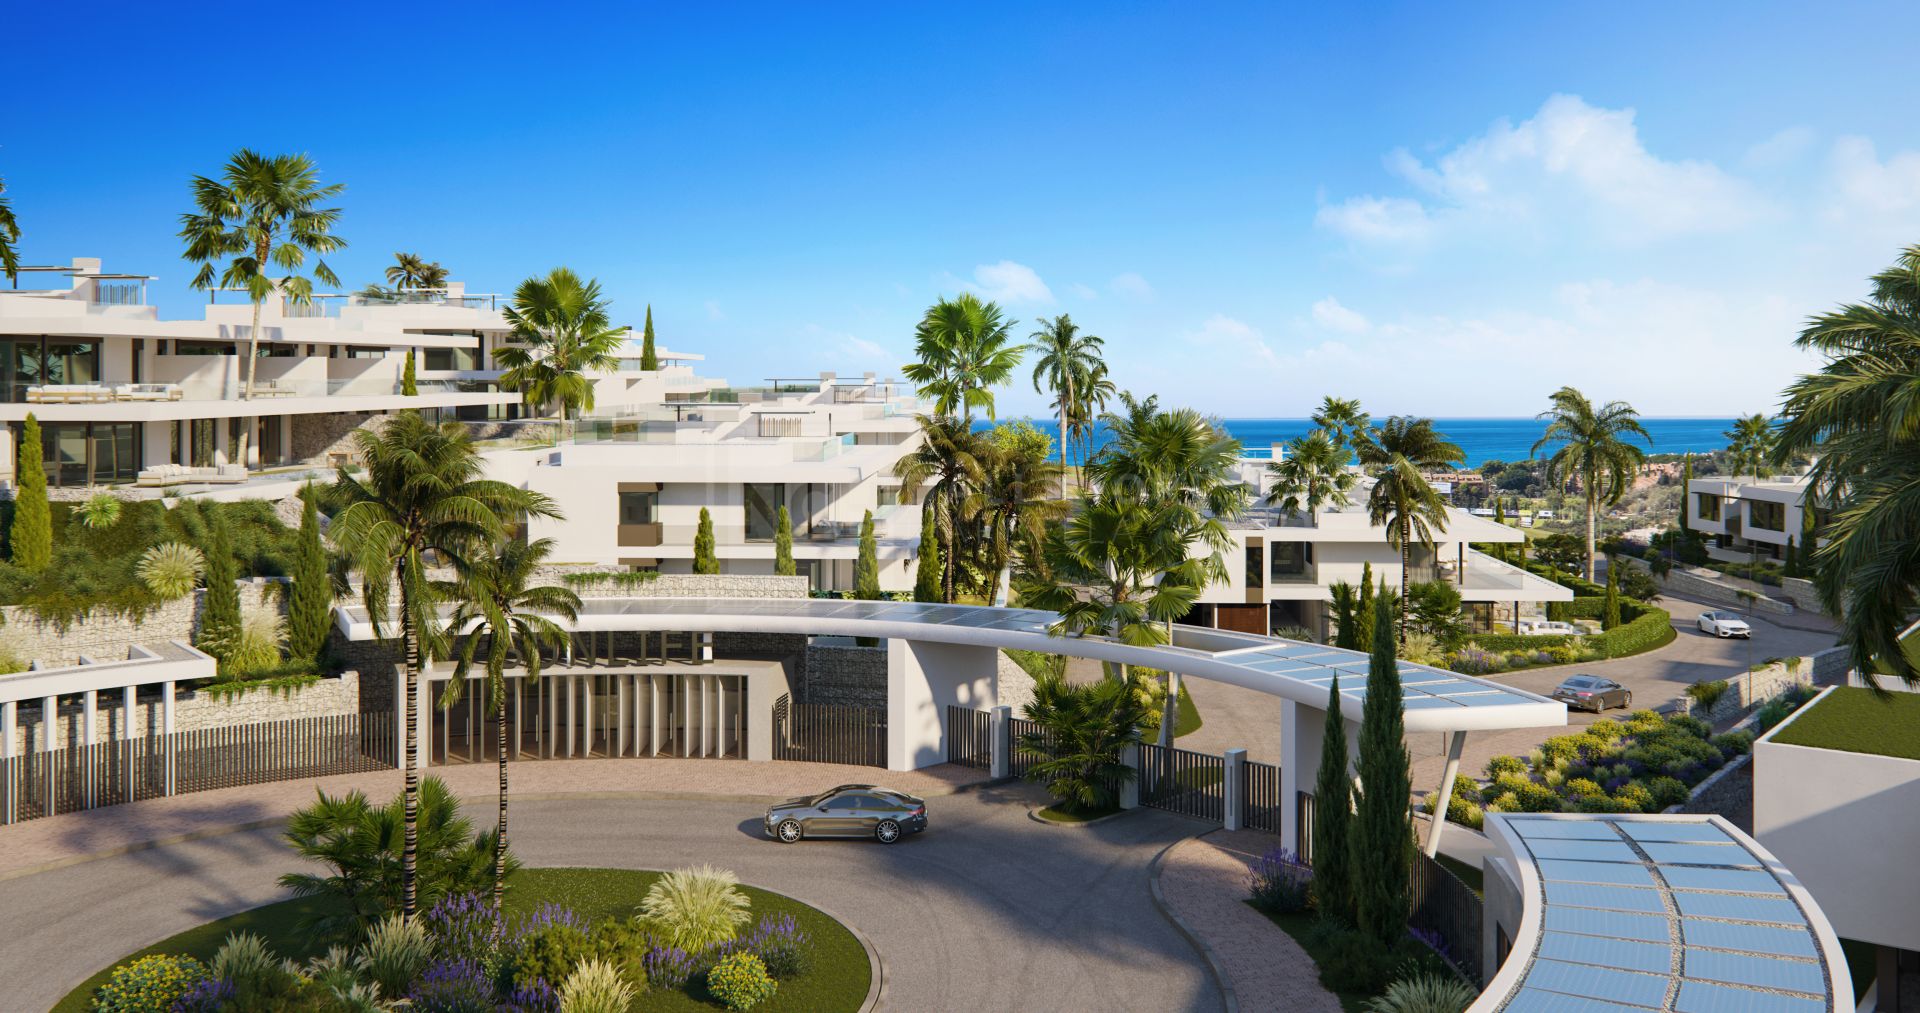 STUNNING BRAND NEW 4-BEDROOM CONTEMPORARY SEMI-DETACHED VILLA WITH SEA VIEWS EAST OF MARBELLA